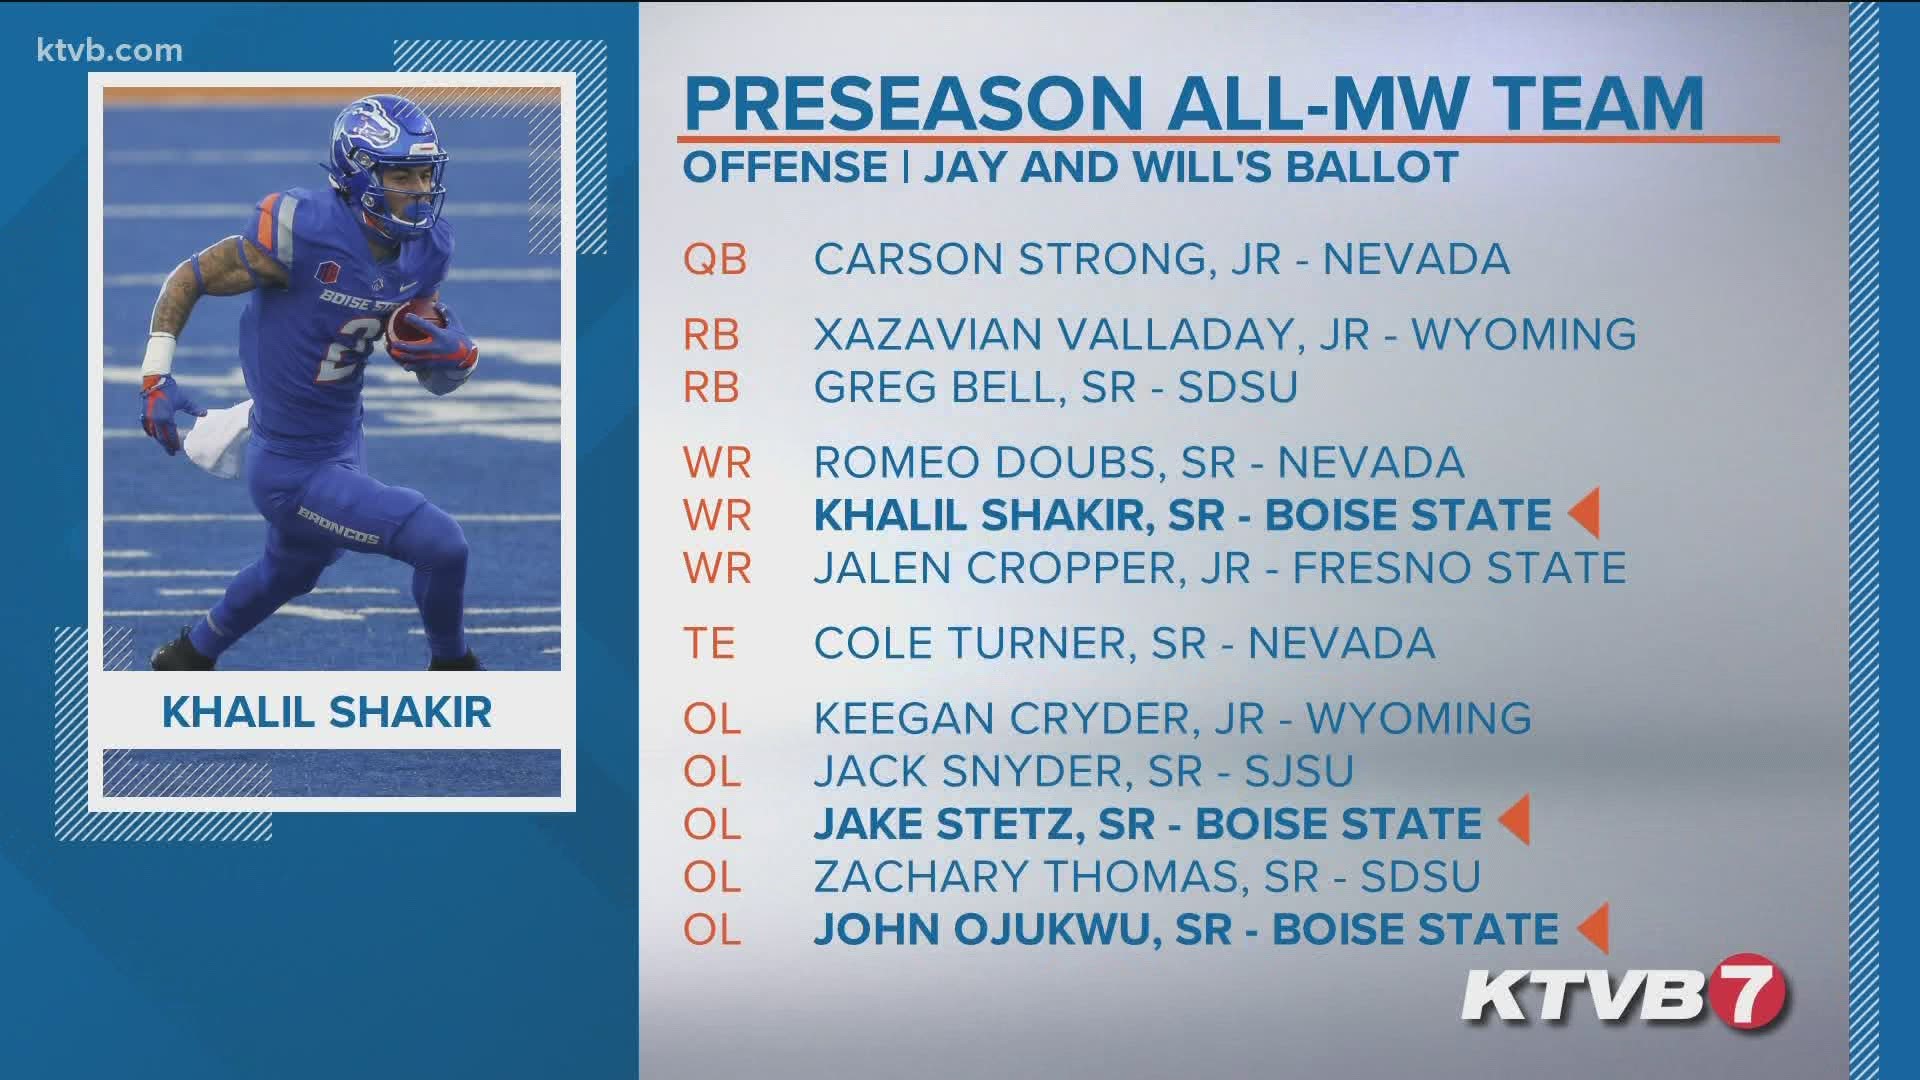 Mountain West Media Days kicks off in Las Vegas this week and KTVB's sports team breaks down some of the best offensive players in the Mountain West Conference.